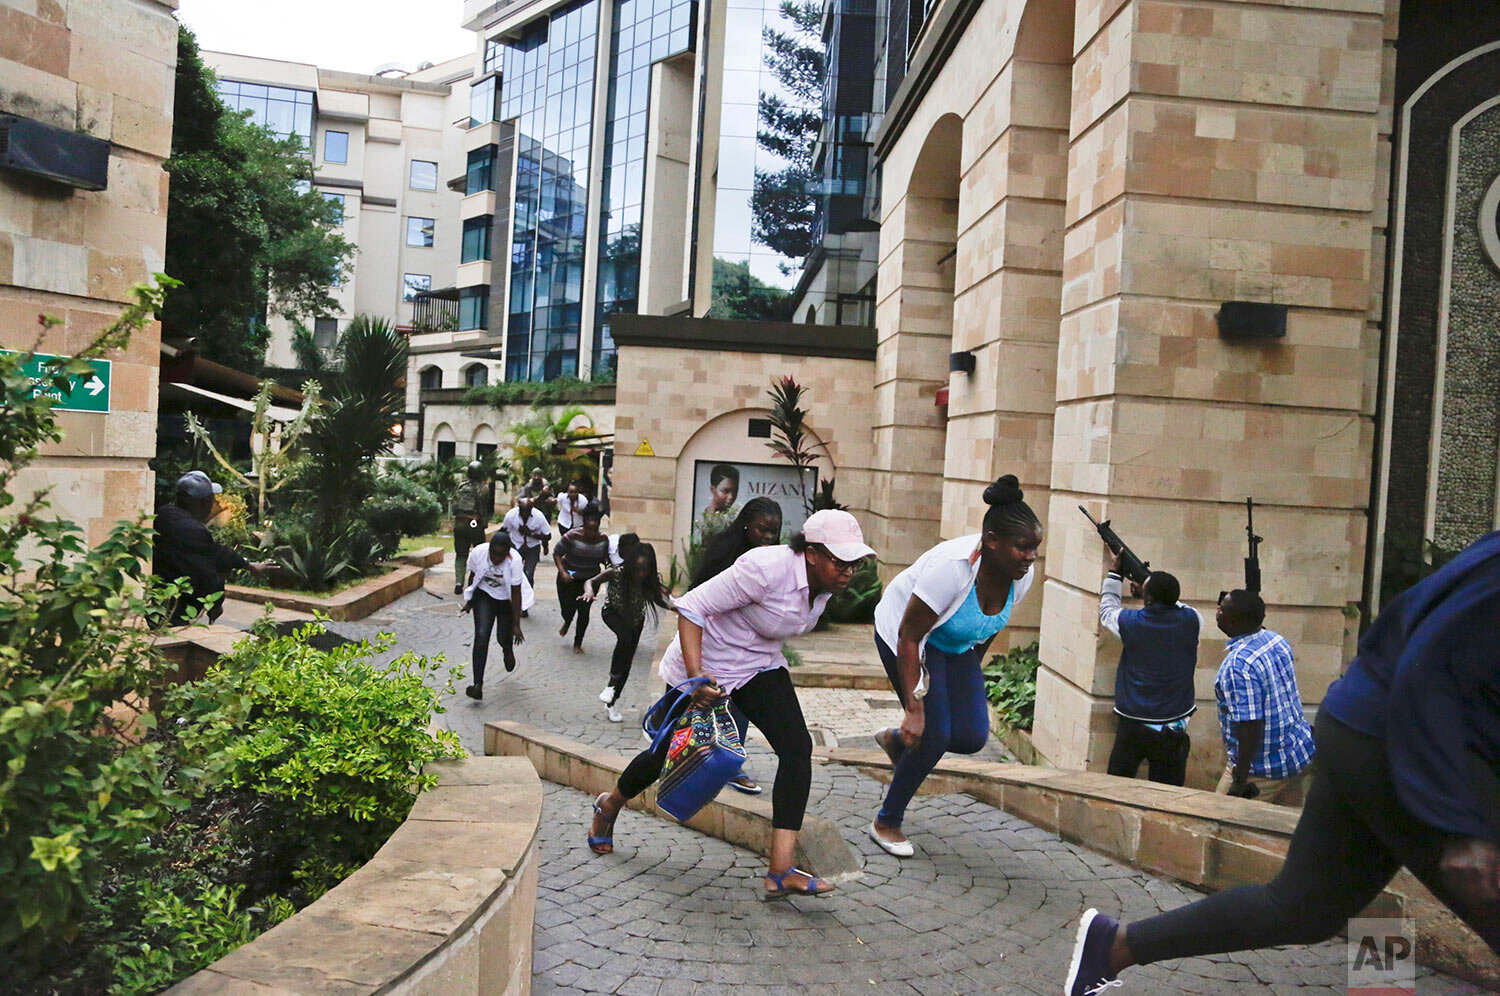  People flee as security forces aim their weapons during a deadly attack by extremists at a luxury hotel complex in Nairobi, Kenya, on Jan. 15, 2019. Explosions and heavy gunfire reverberated through the complex during the attack that killed more tha